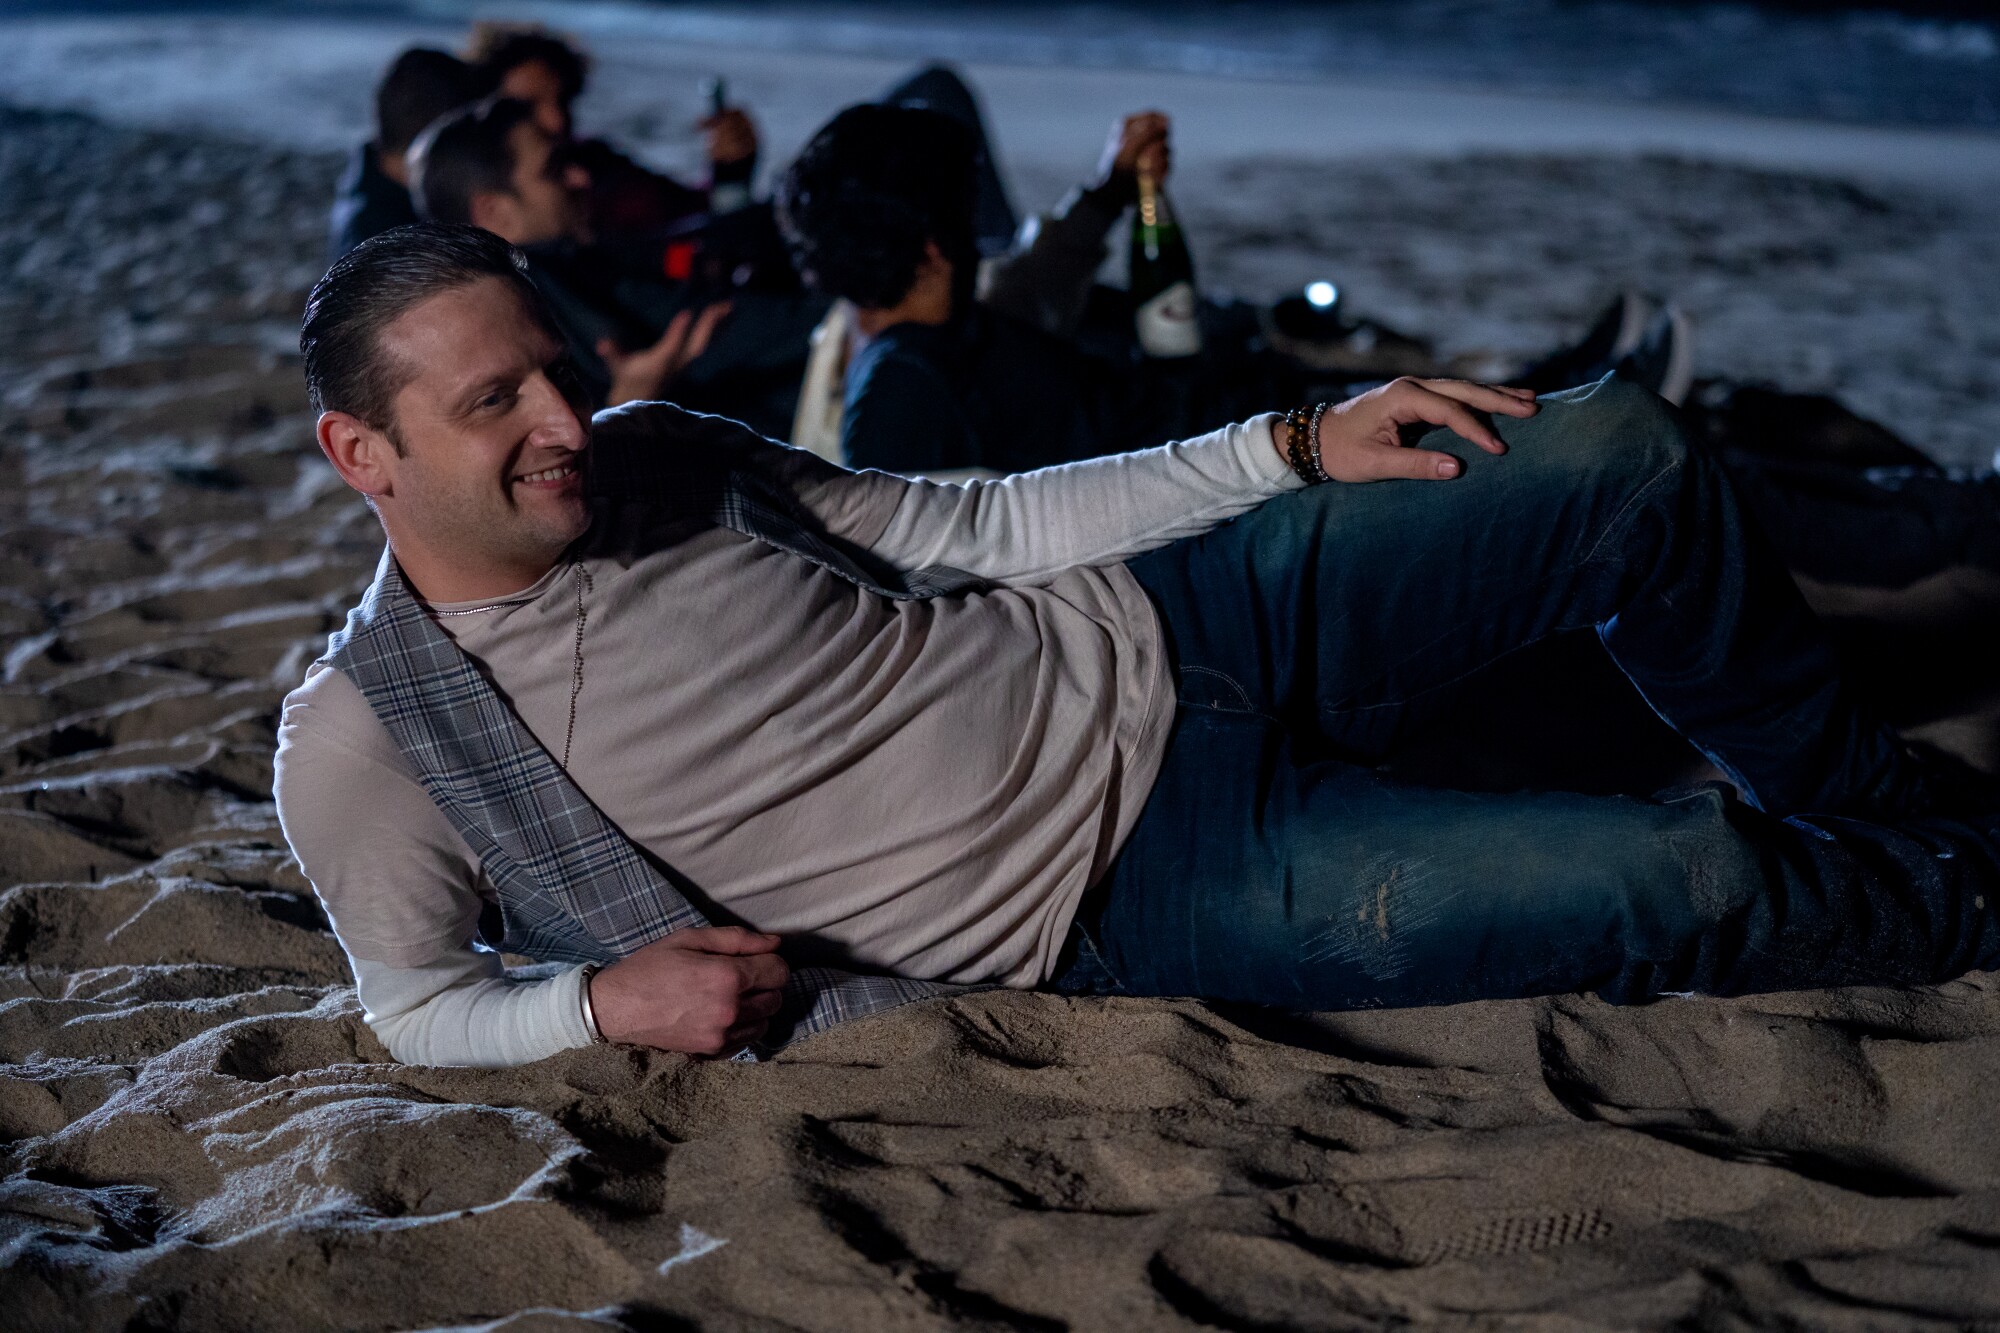 Tim Robinson on the beach in a season 2 of "I Think You Should Leave."